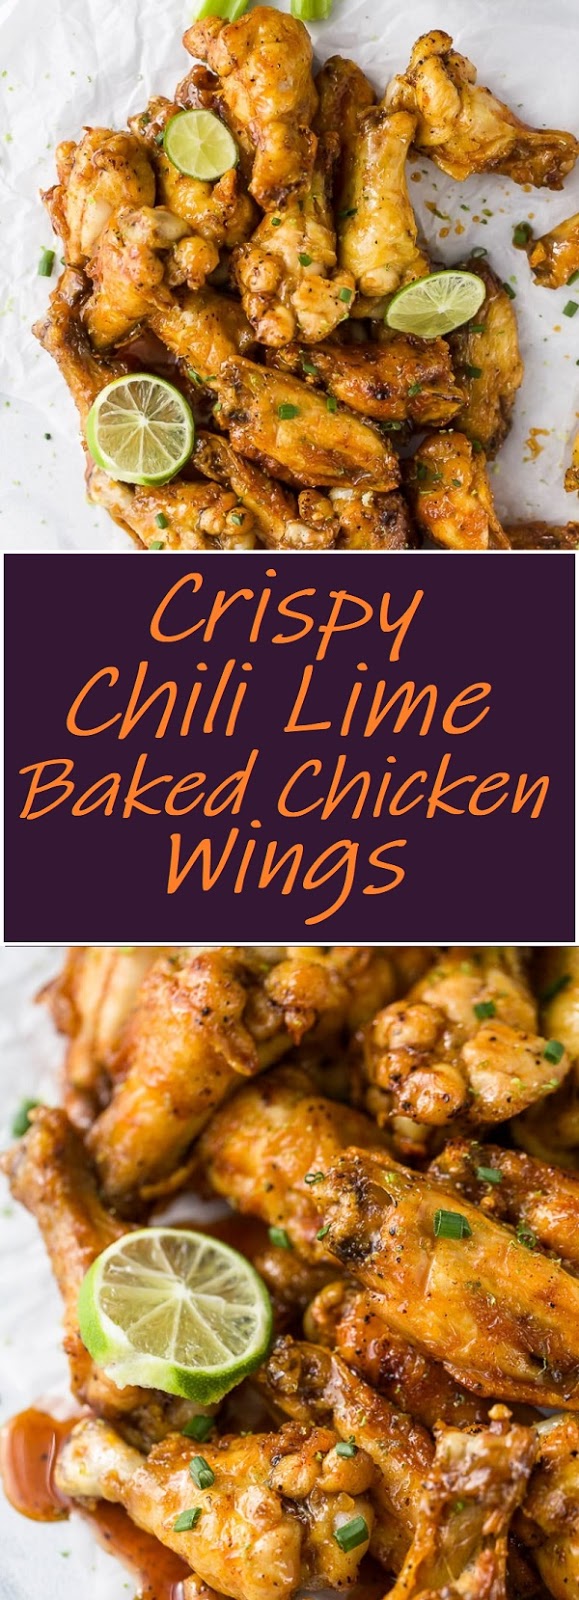 Crispy Chili Lime Baked Chicken Wings - Easy Recipes